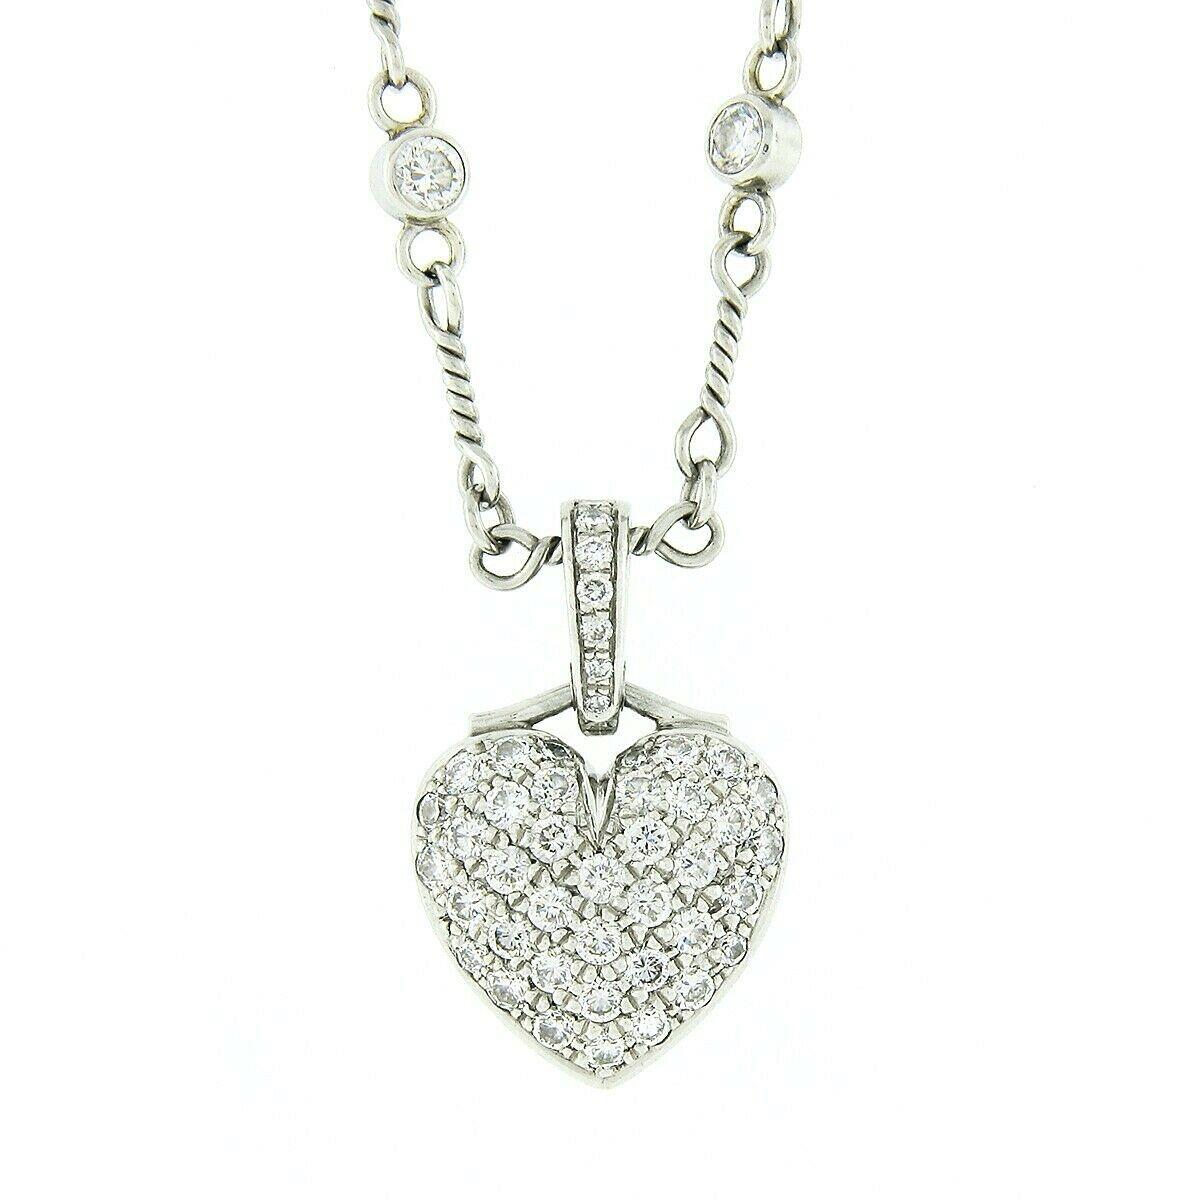 This stunning Tiffany & Co. diamond pendant necklace was crafted in France from solid platinum. It features a lovely heart shaped pendant that is drenched with approximately 0.60 carats of round brilliant cut diamonds that are pave set throughout